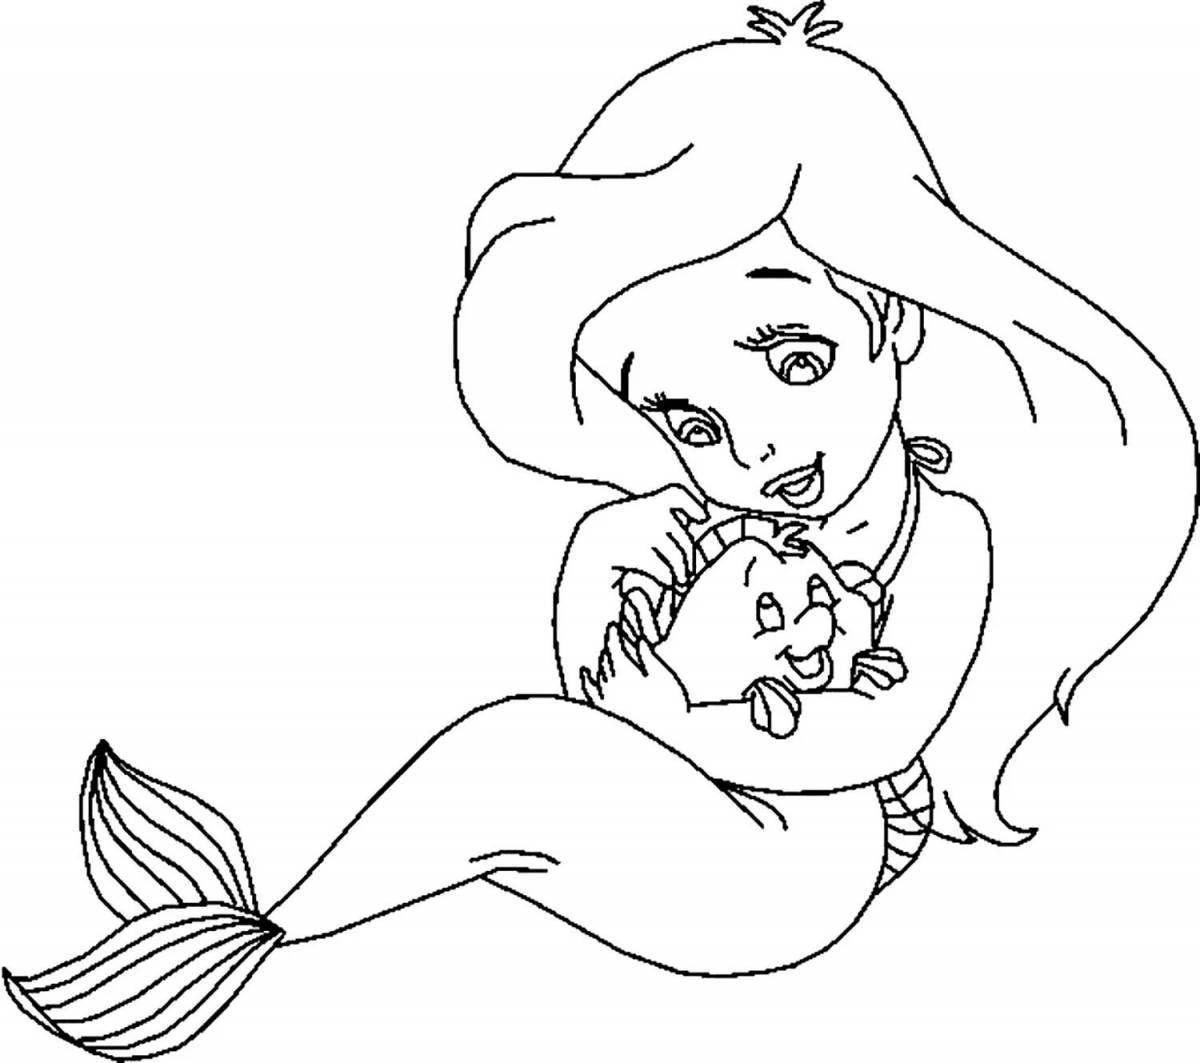 Awesome ariel the little mermaid coloring book for girls